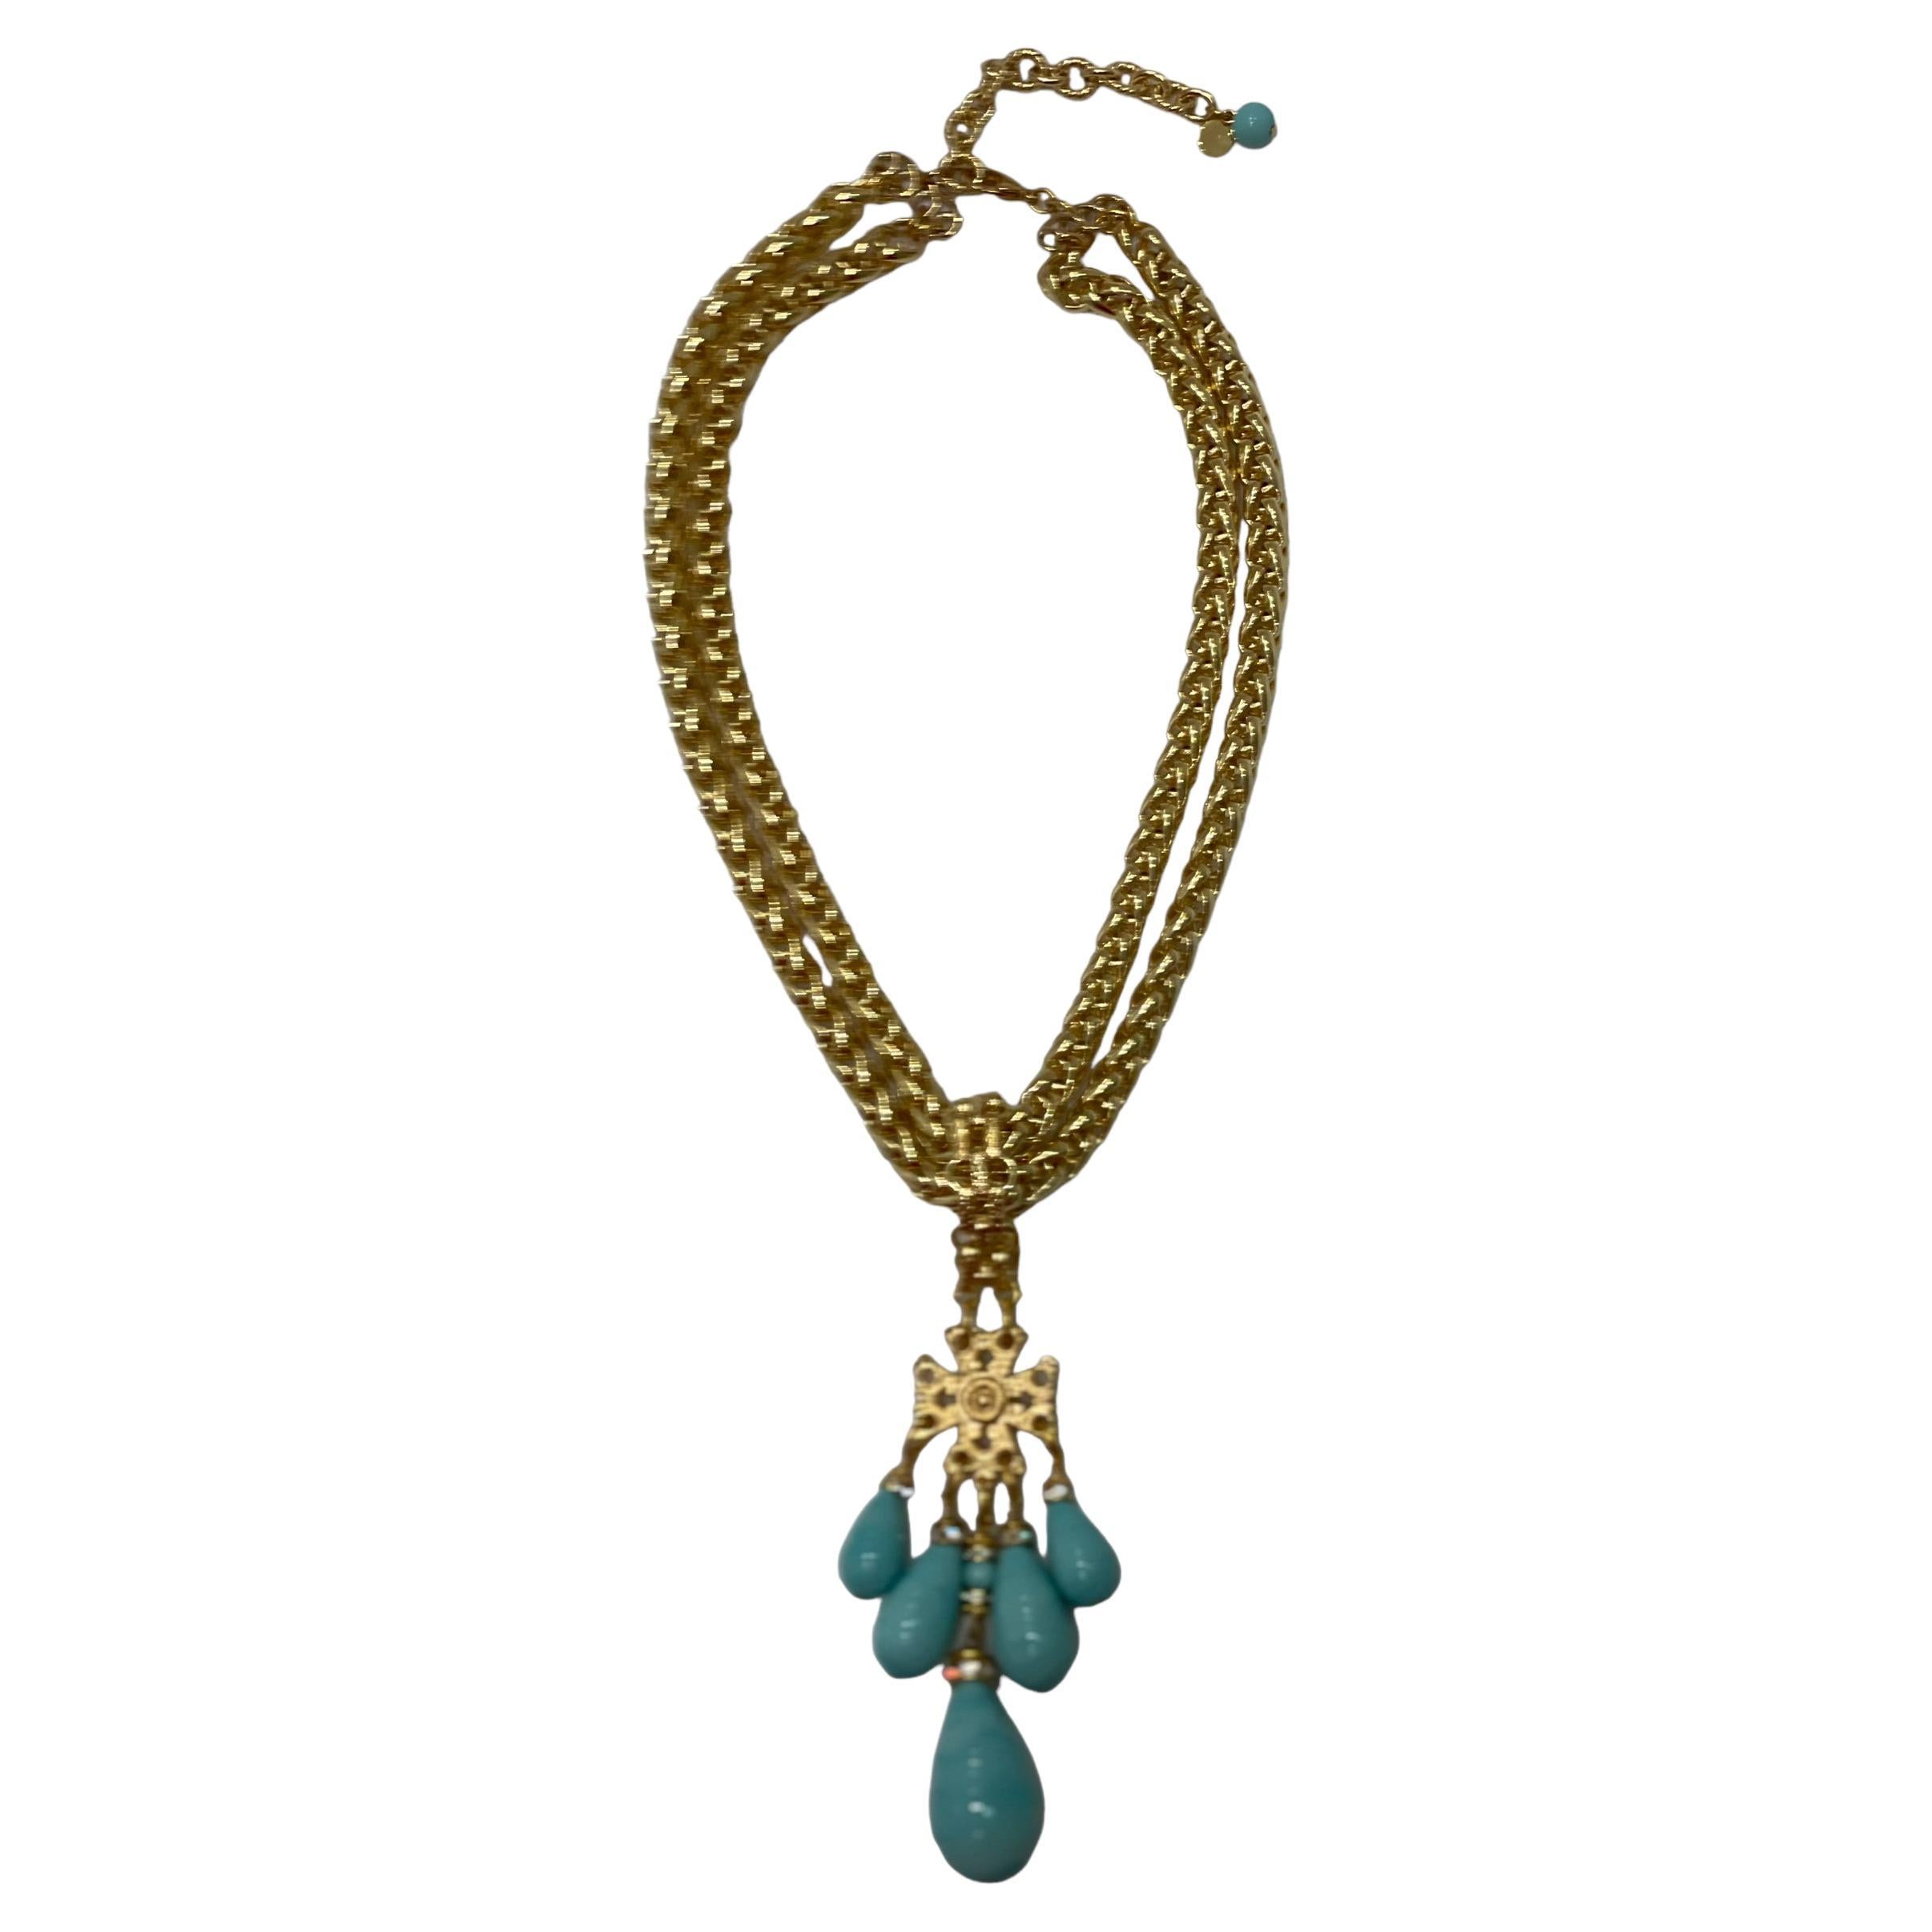 Brass plated gold chain with removable pendant . 5 pate de verre drops set with Swarovski Crystal rondelles. Pendant is 5” long. Extension chain is 3 “ and stamp with Francoise Montague signature 
Francoise Montague took over the De Saurma jewelry